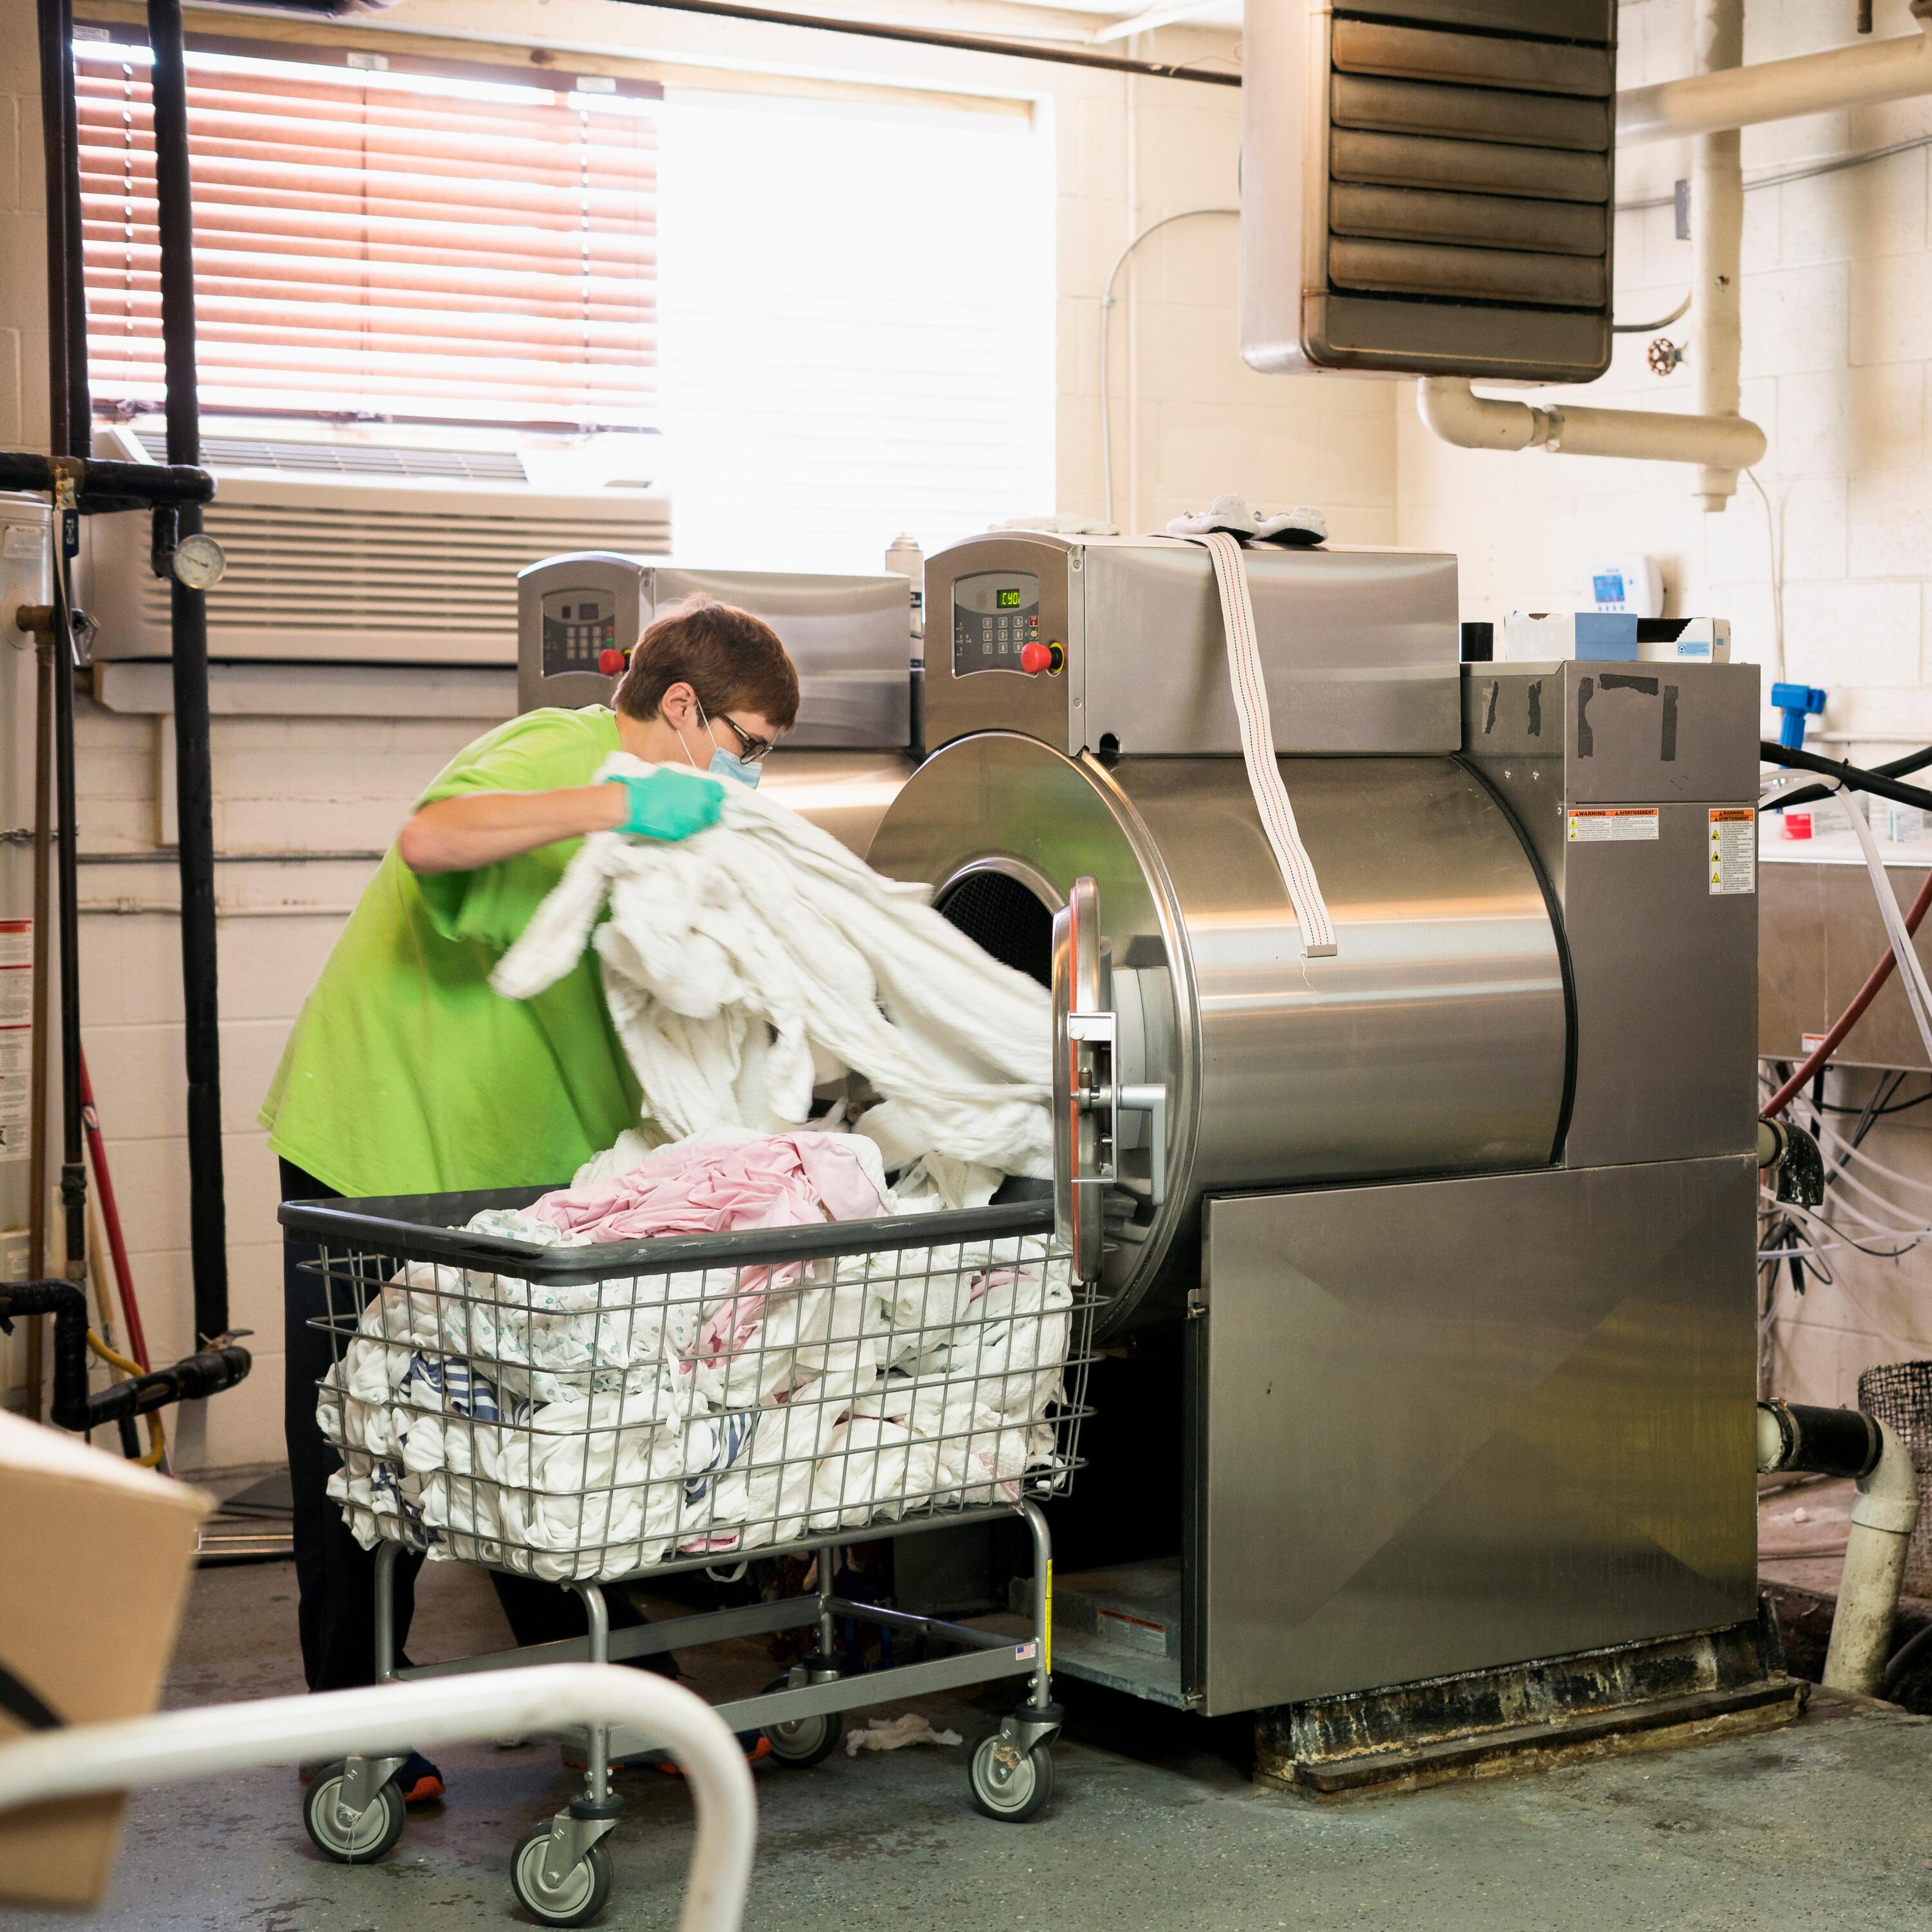 A person handling laundry in a hospital setting